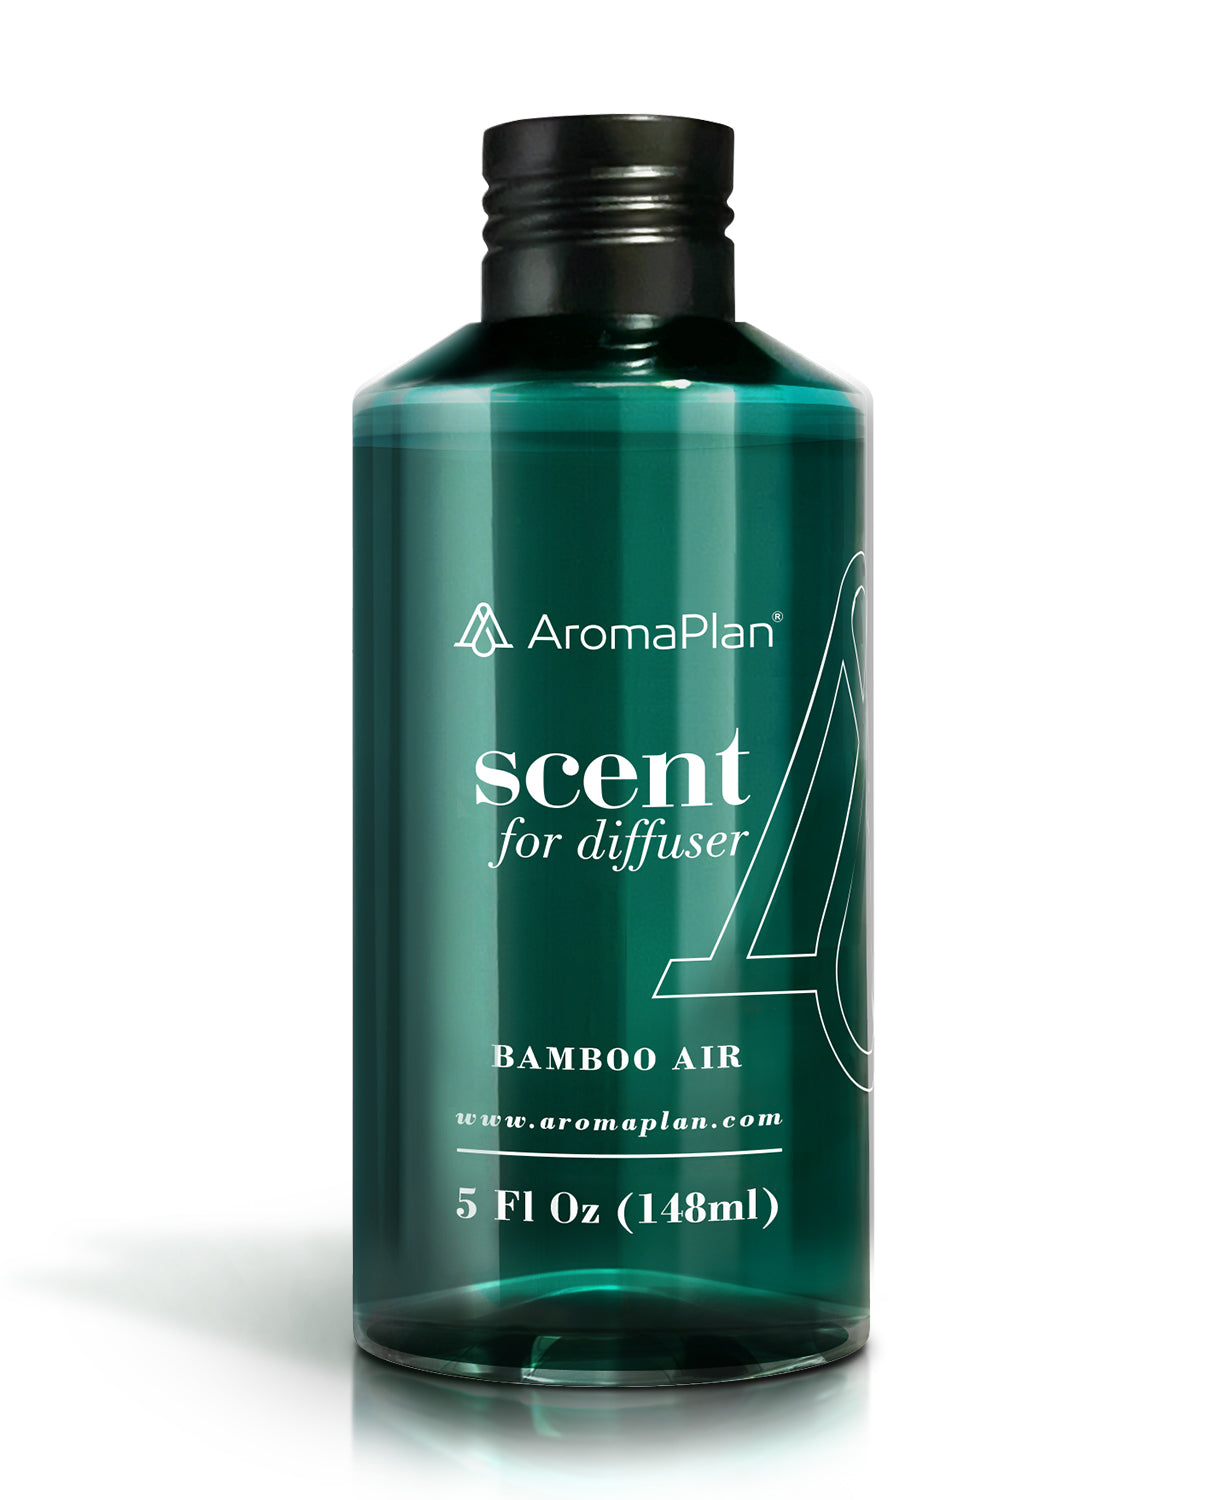 Discover the Scent Bamboo Air (Inspired by &quot;M.Martan Brazil&quot;) Fragrance - Aroma Oil for Scent Diffusers - Natural &amp; Vegan - Essential Oil Blends for Diffuser - Size: 5 Fl Oz. (148ml)